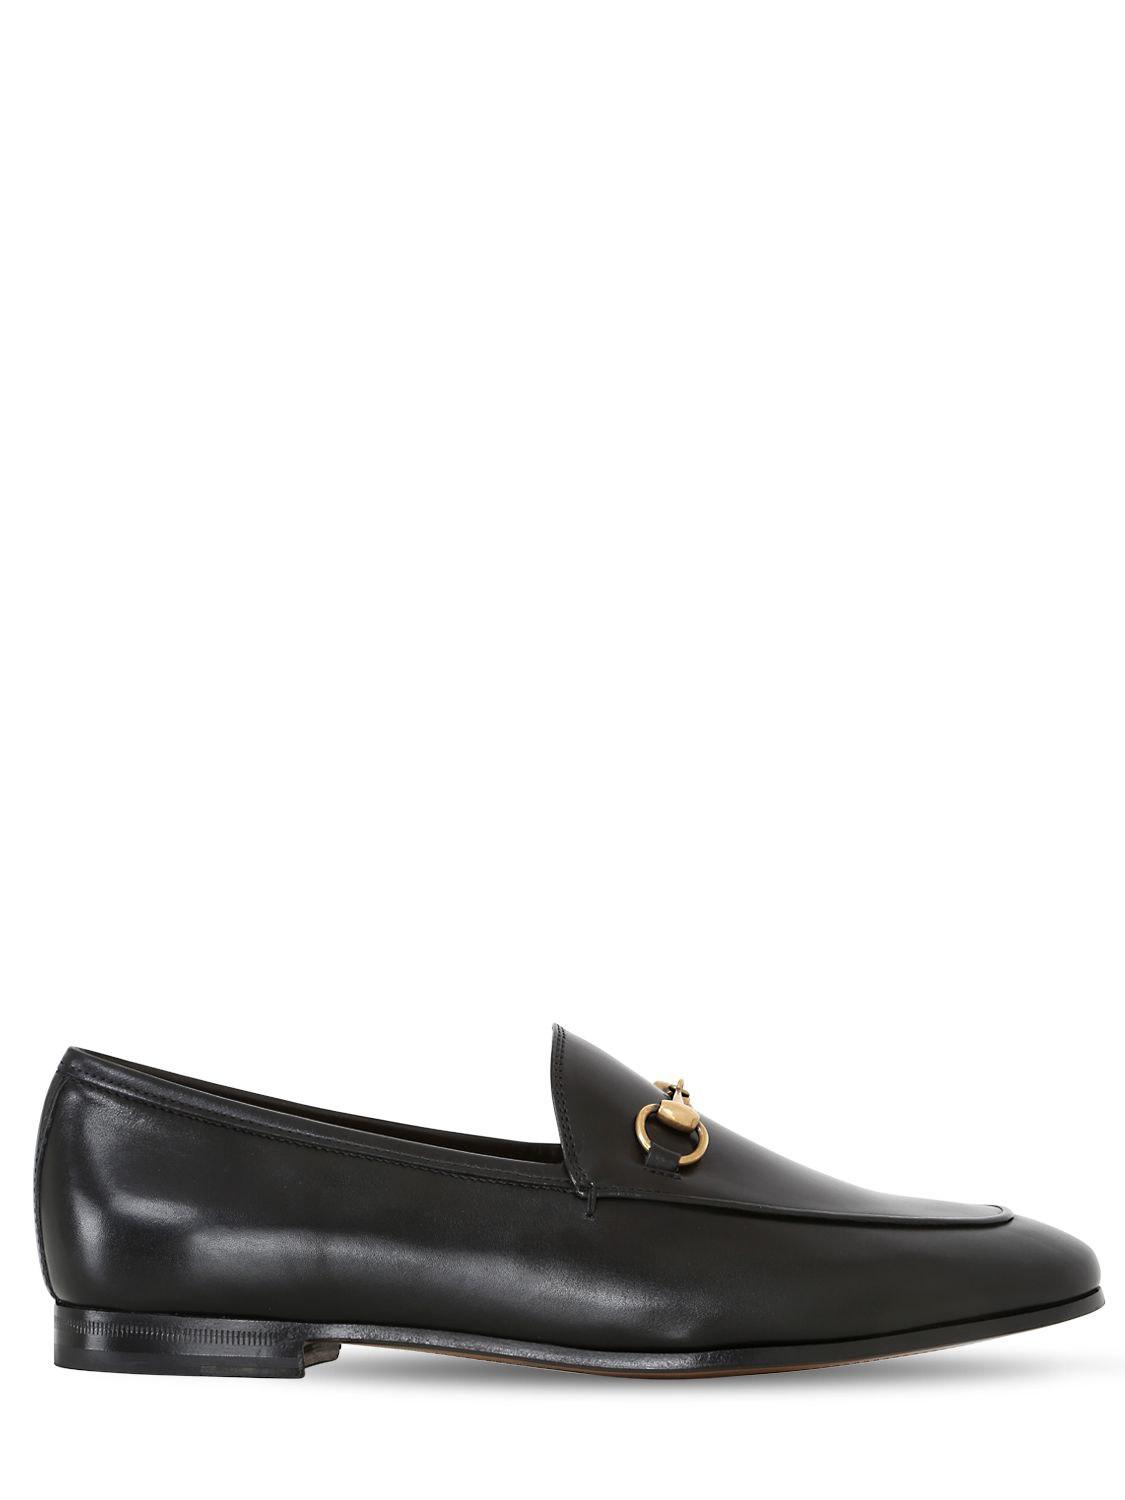 Lyst - Gucci 10mm Jordaan Leather Loafer in Black